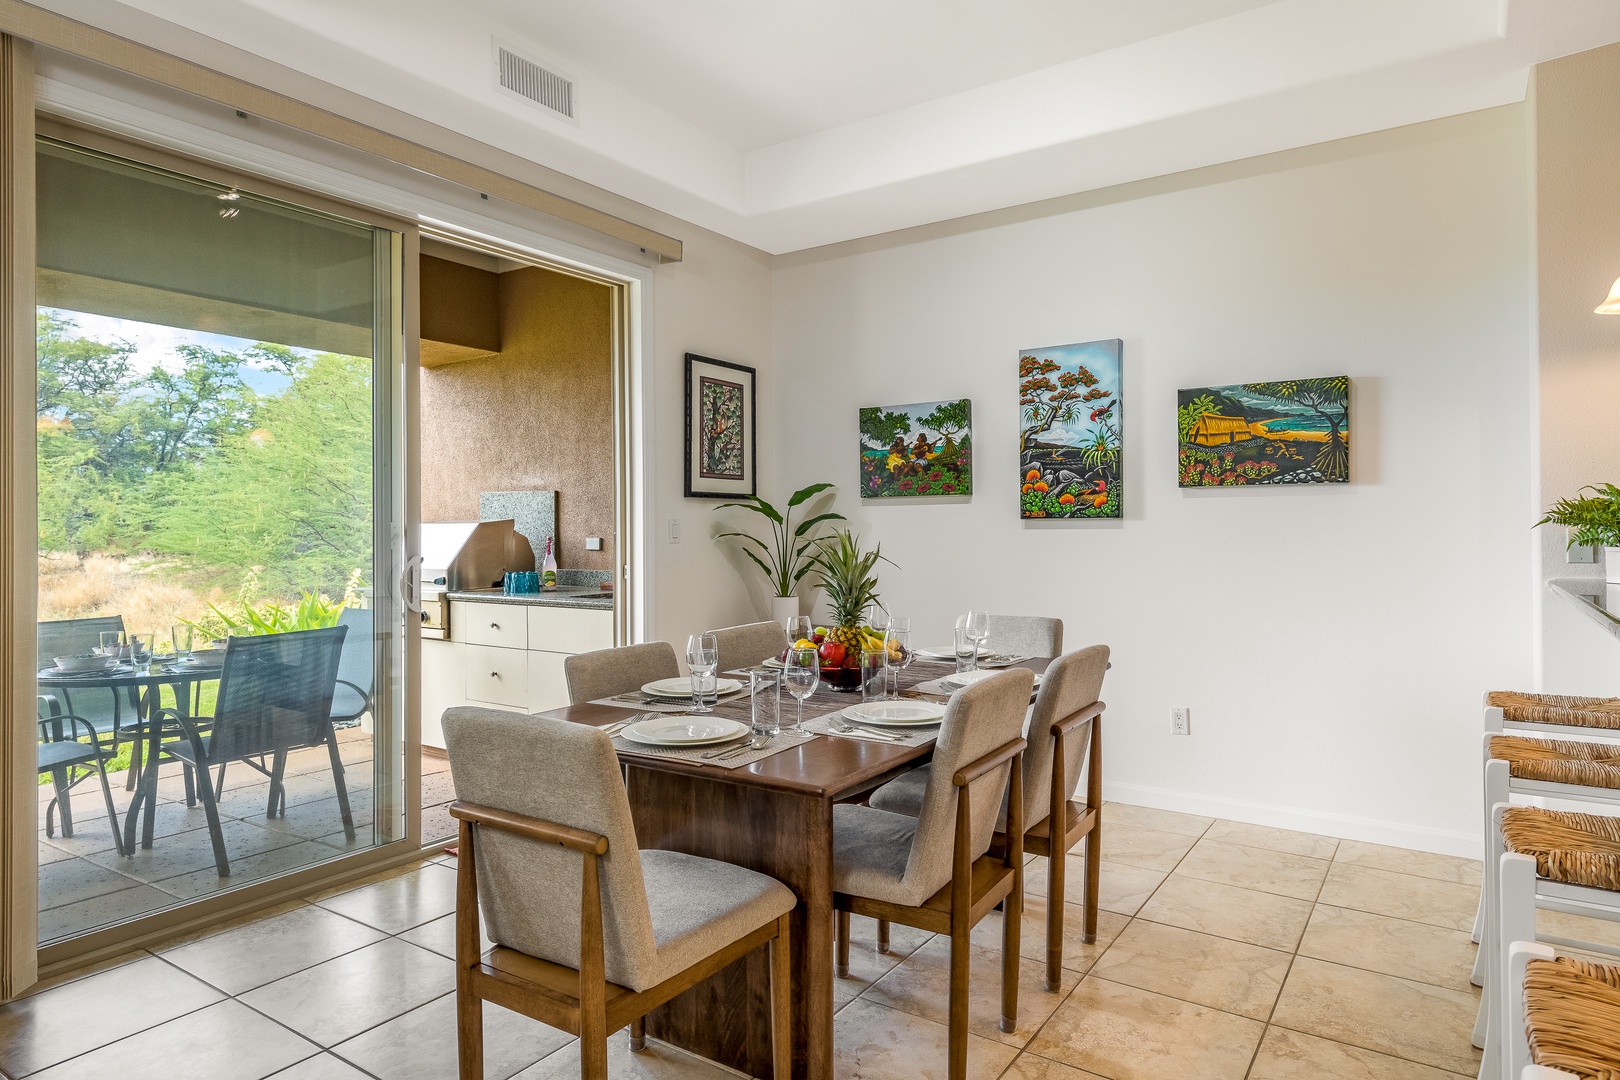 Kamuela Vacation Rentals, Mauna Lani Fairways #603 - Elegant dining for six awaits in the dining area!